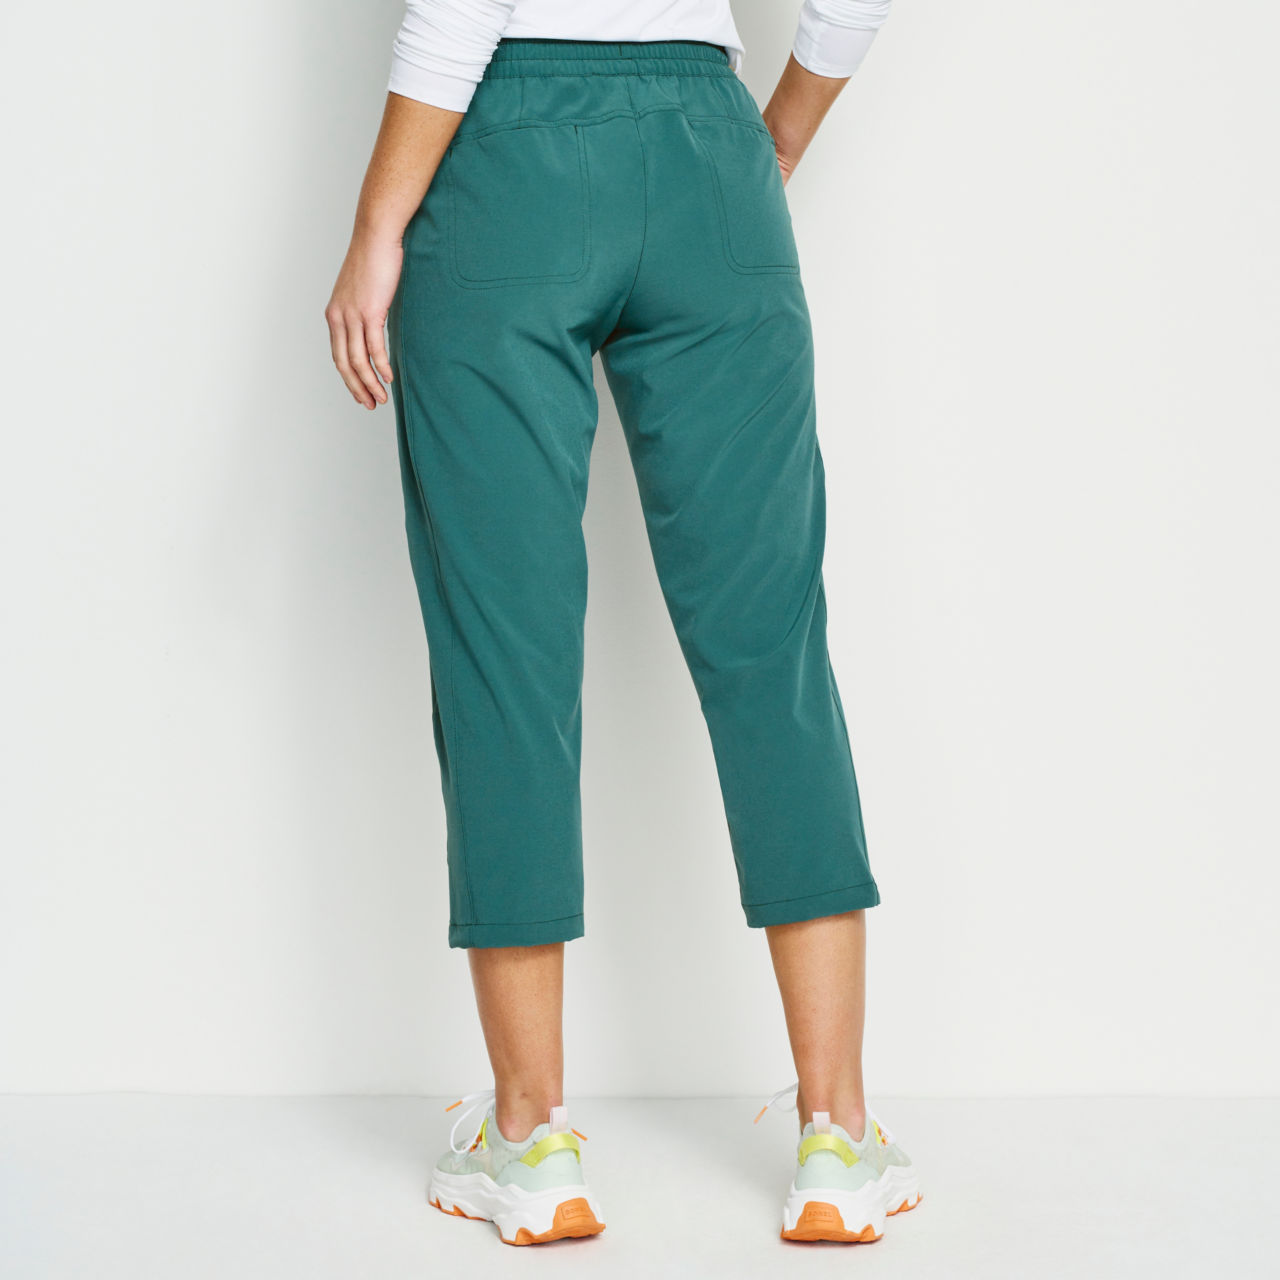 All-Around Relaxed Fit Capri Pants -  image number 2